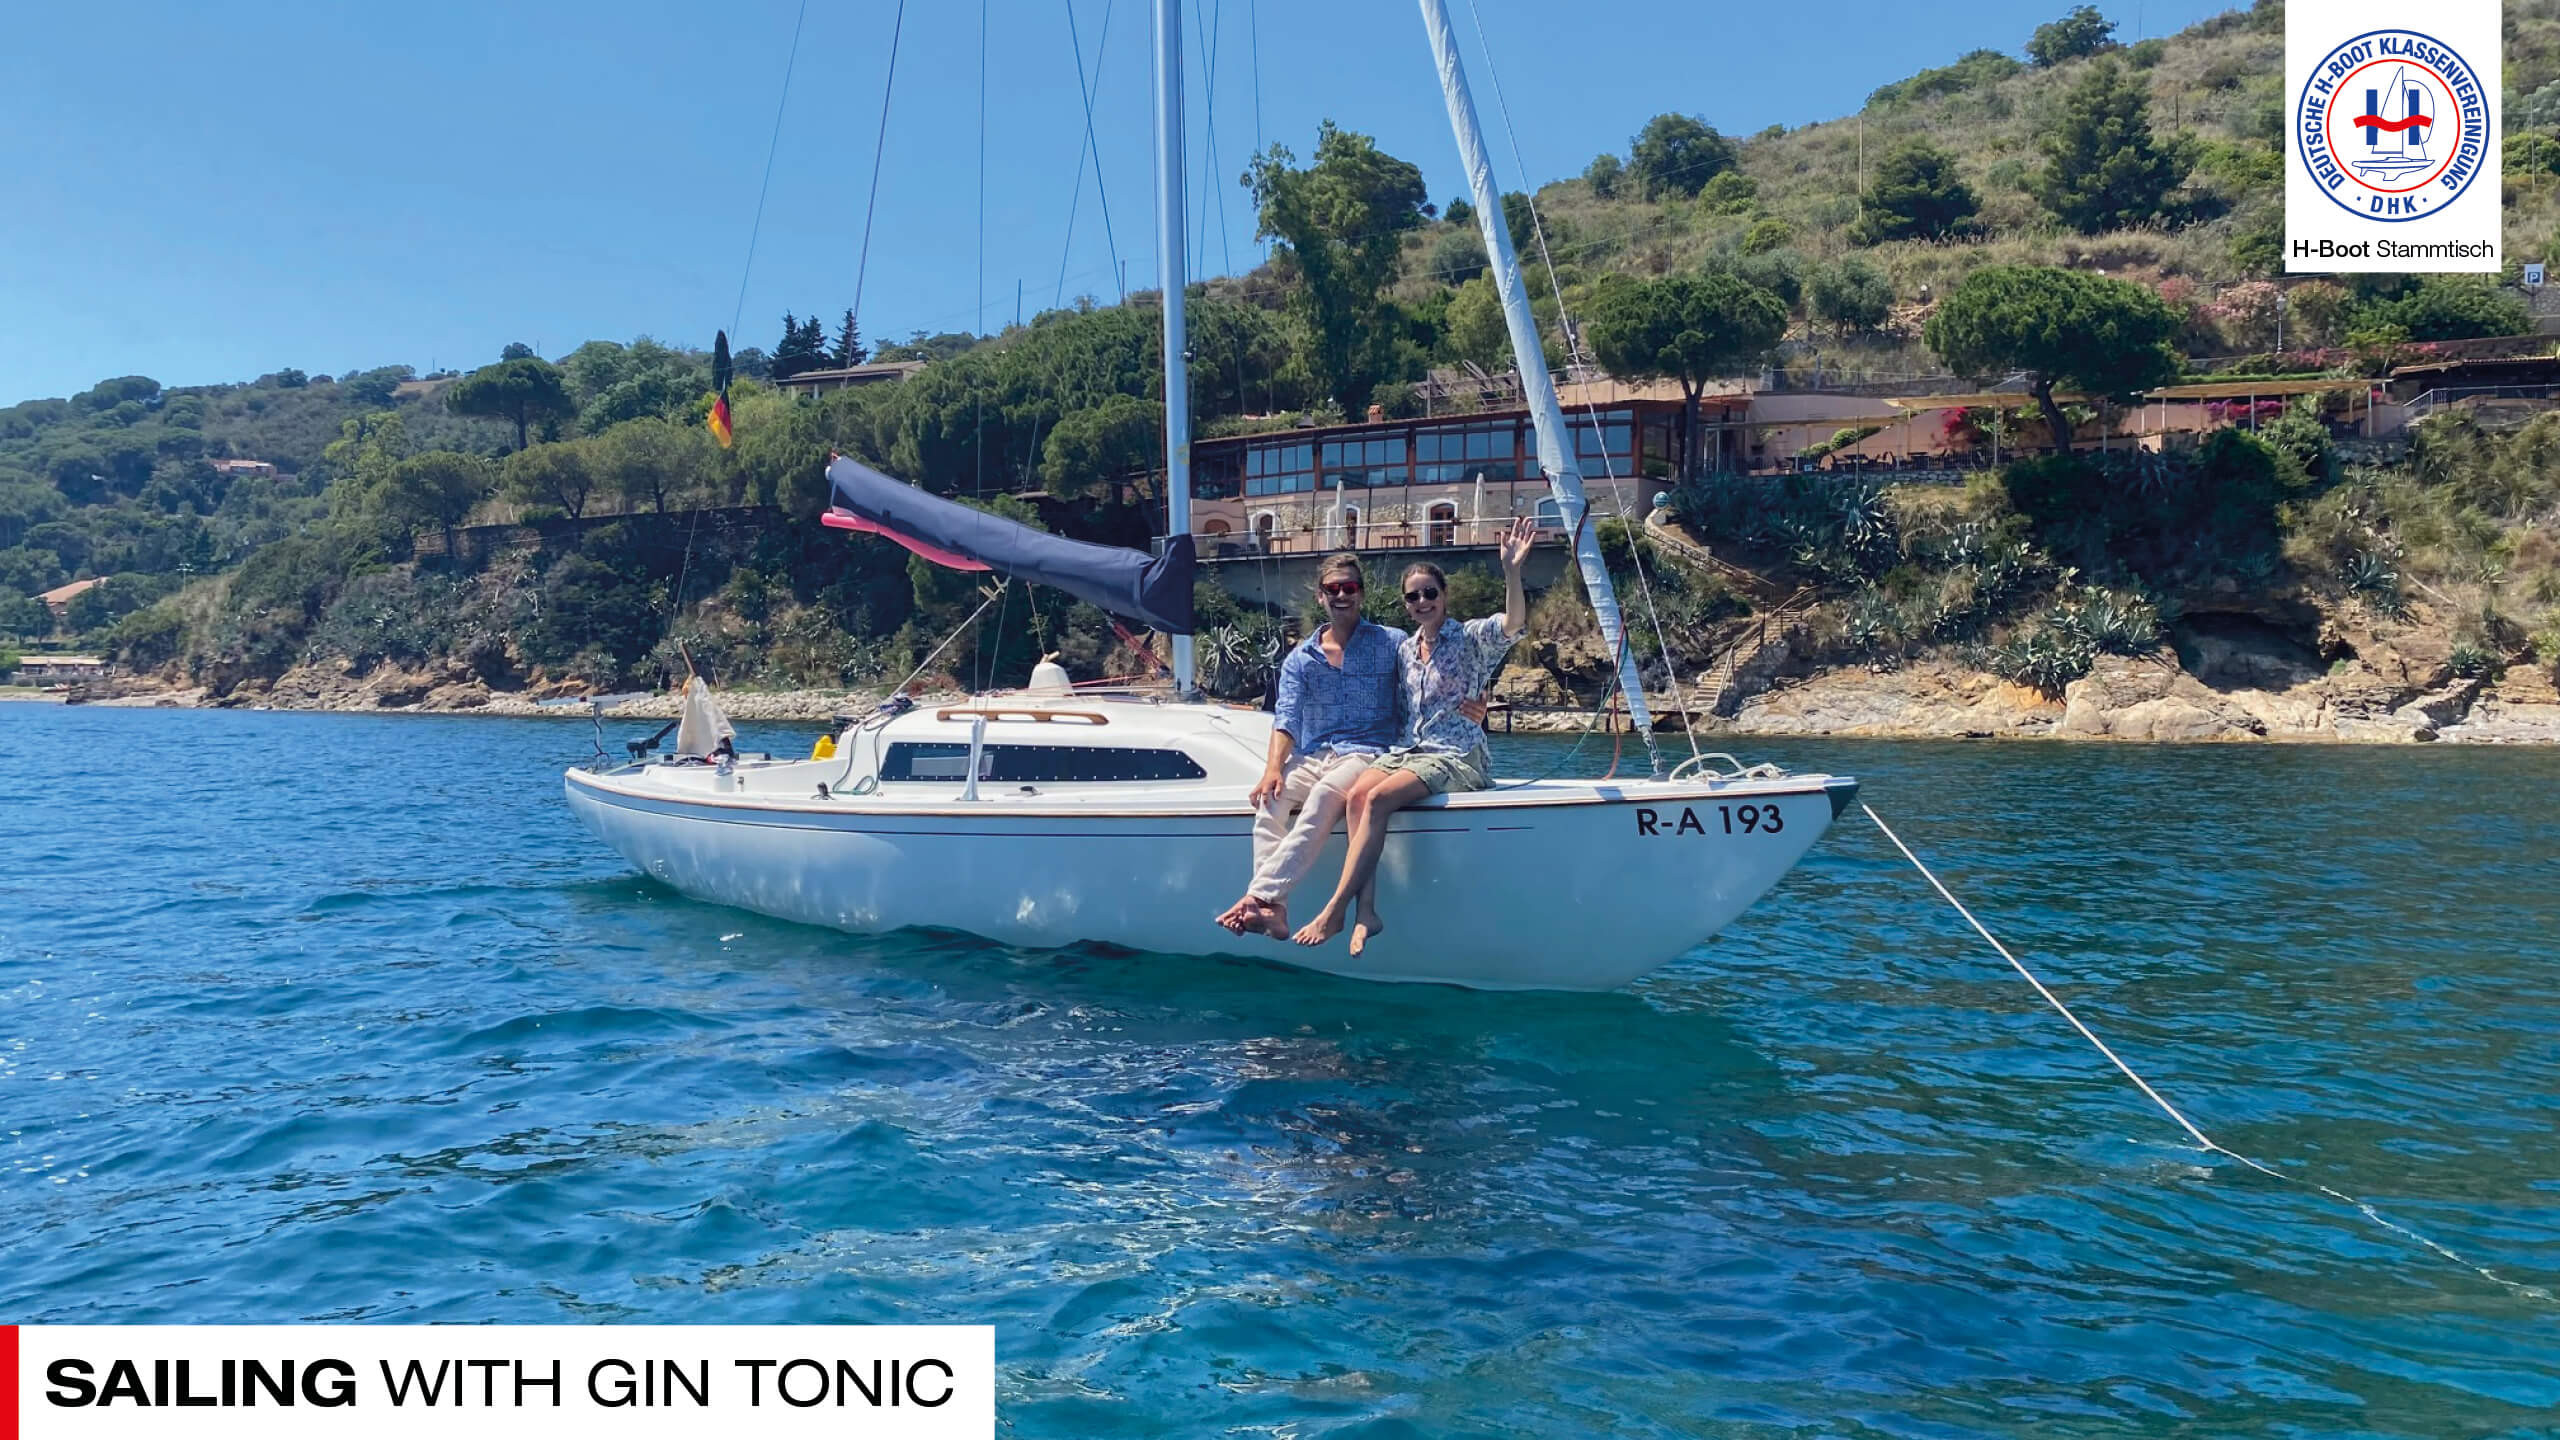 H-Boot Stammtisch Sailing with Gin Tonic.